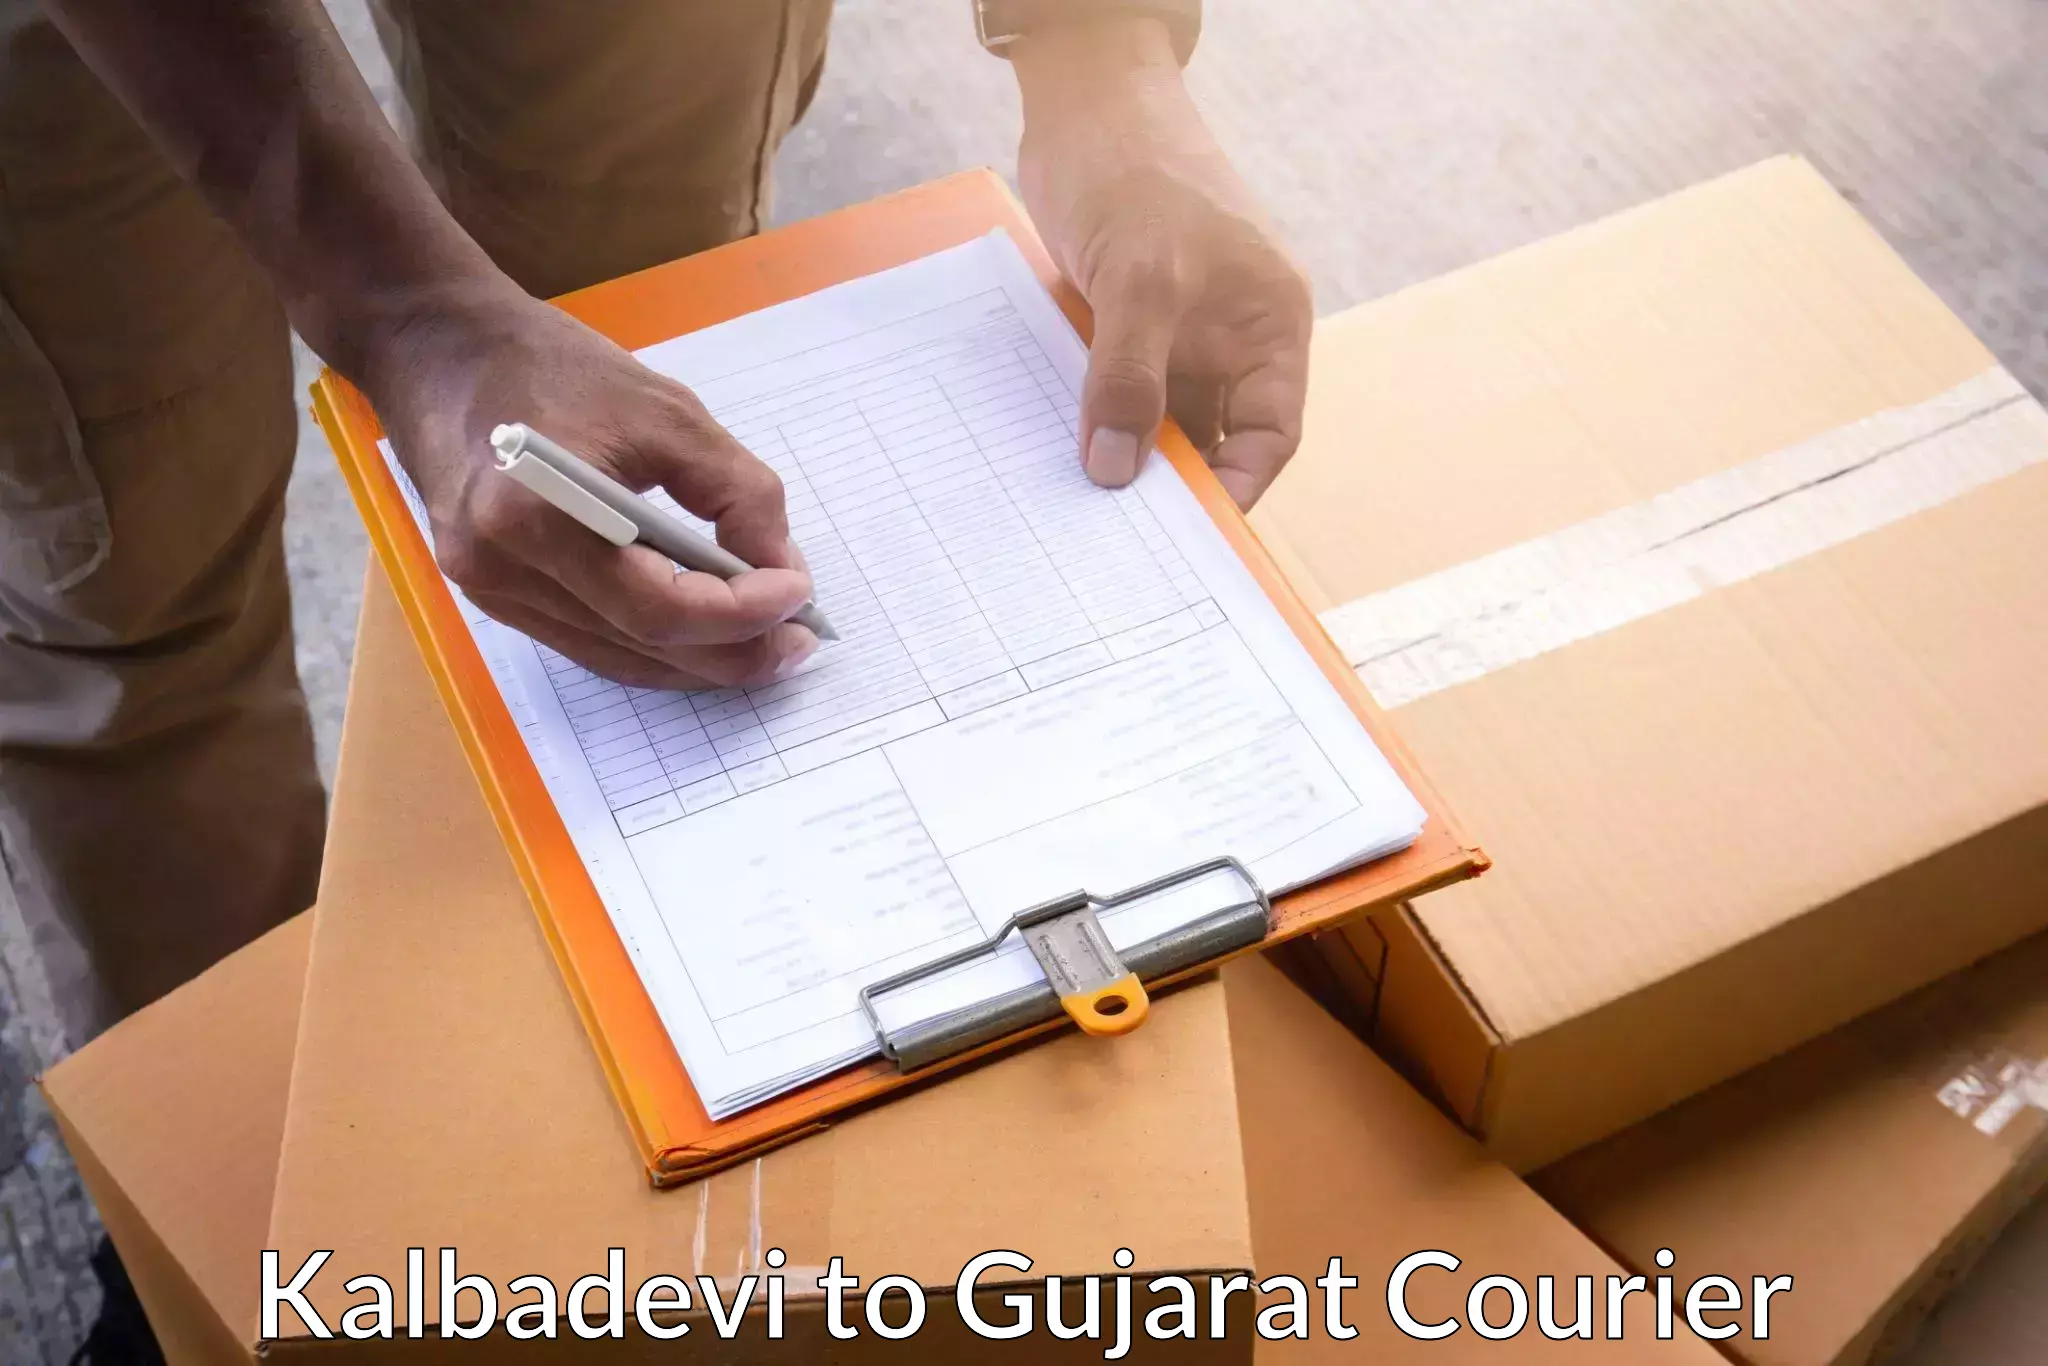 Next-day delivery options Kalbadevi to GIDC